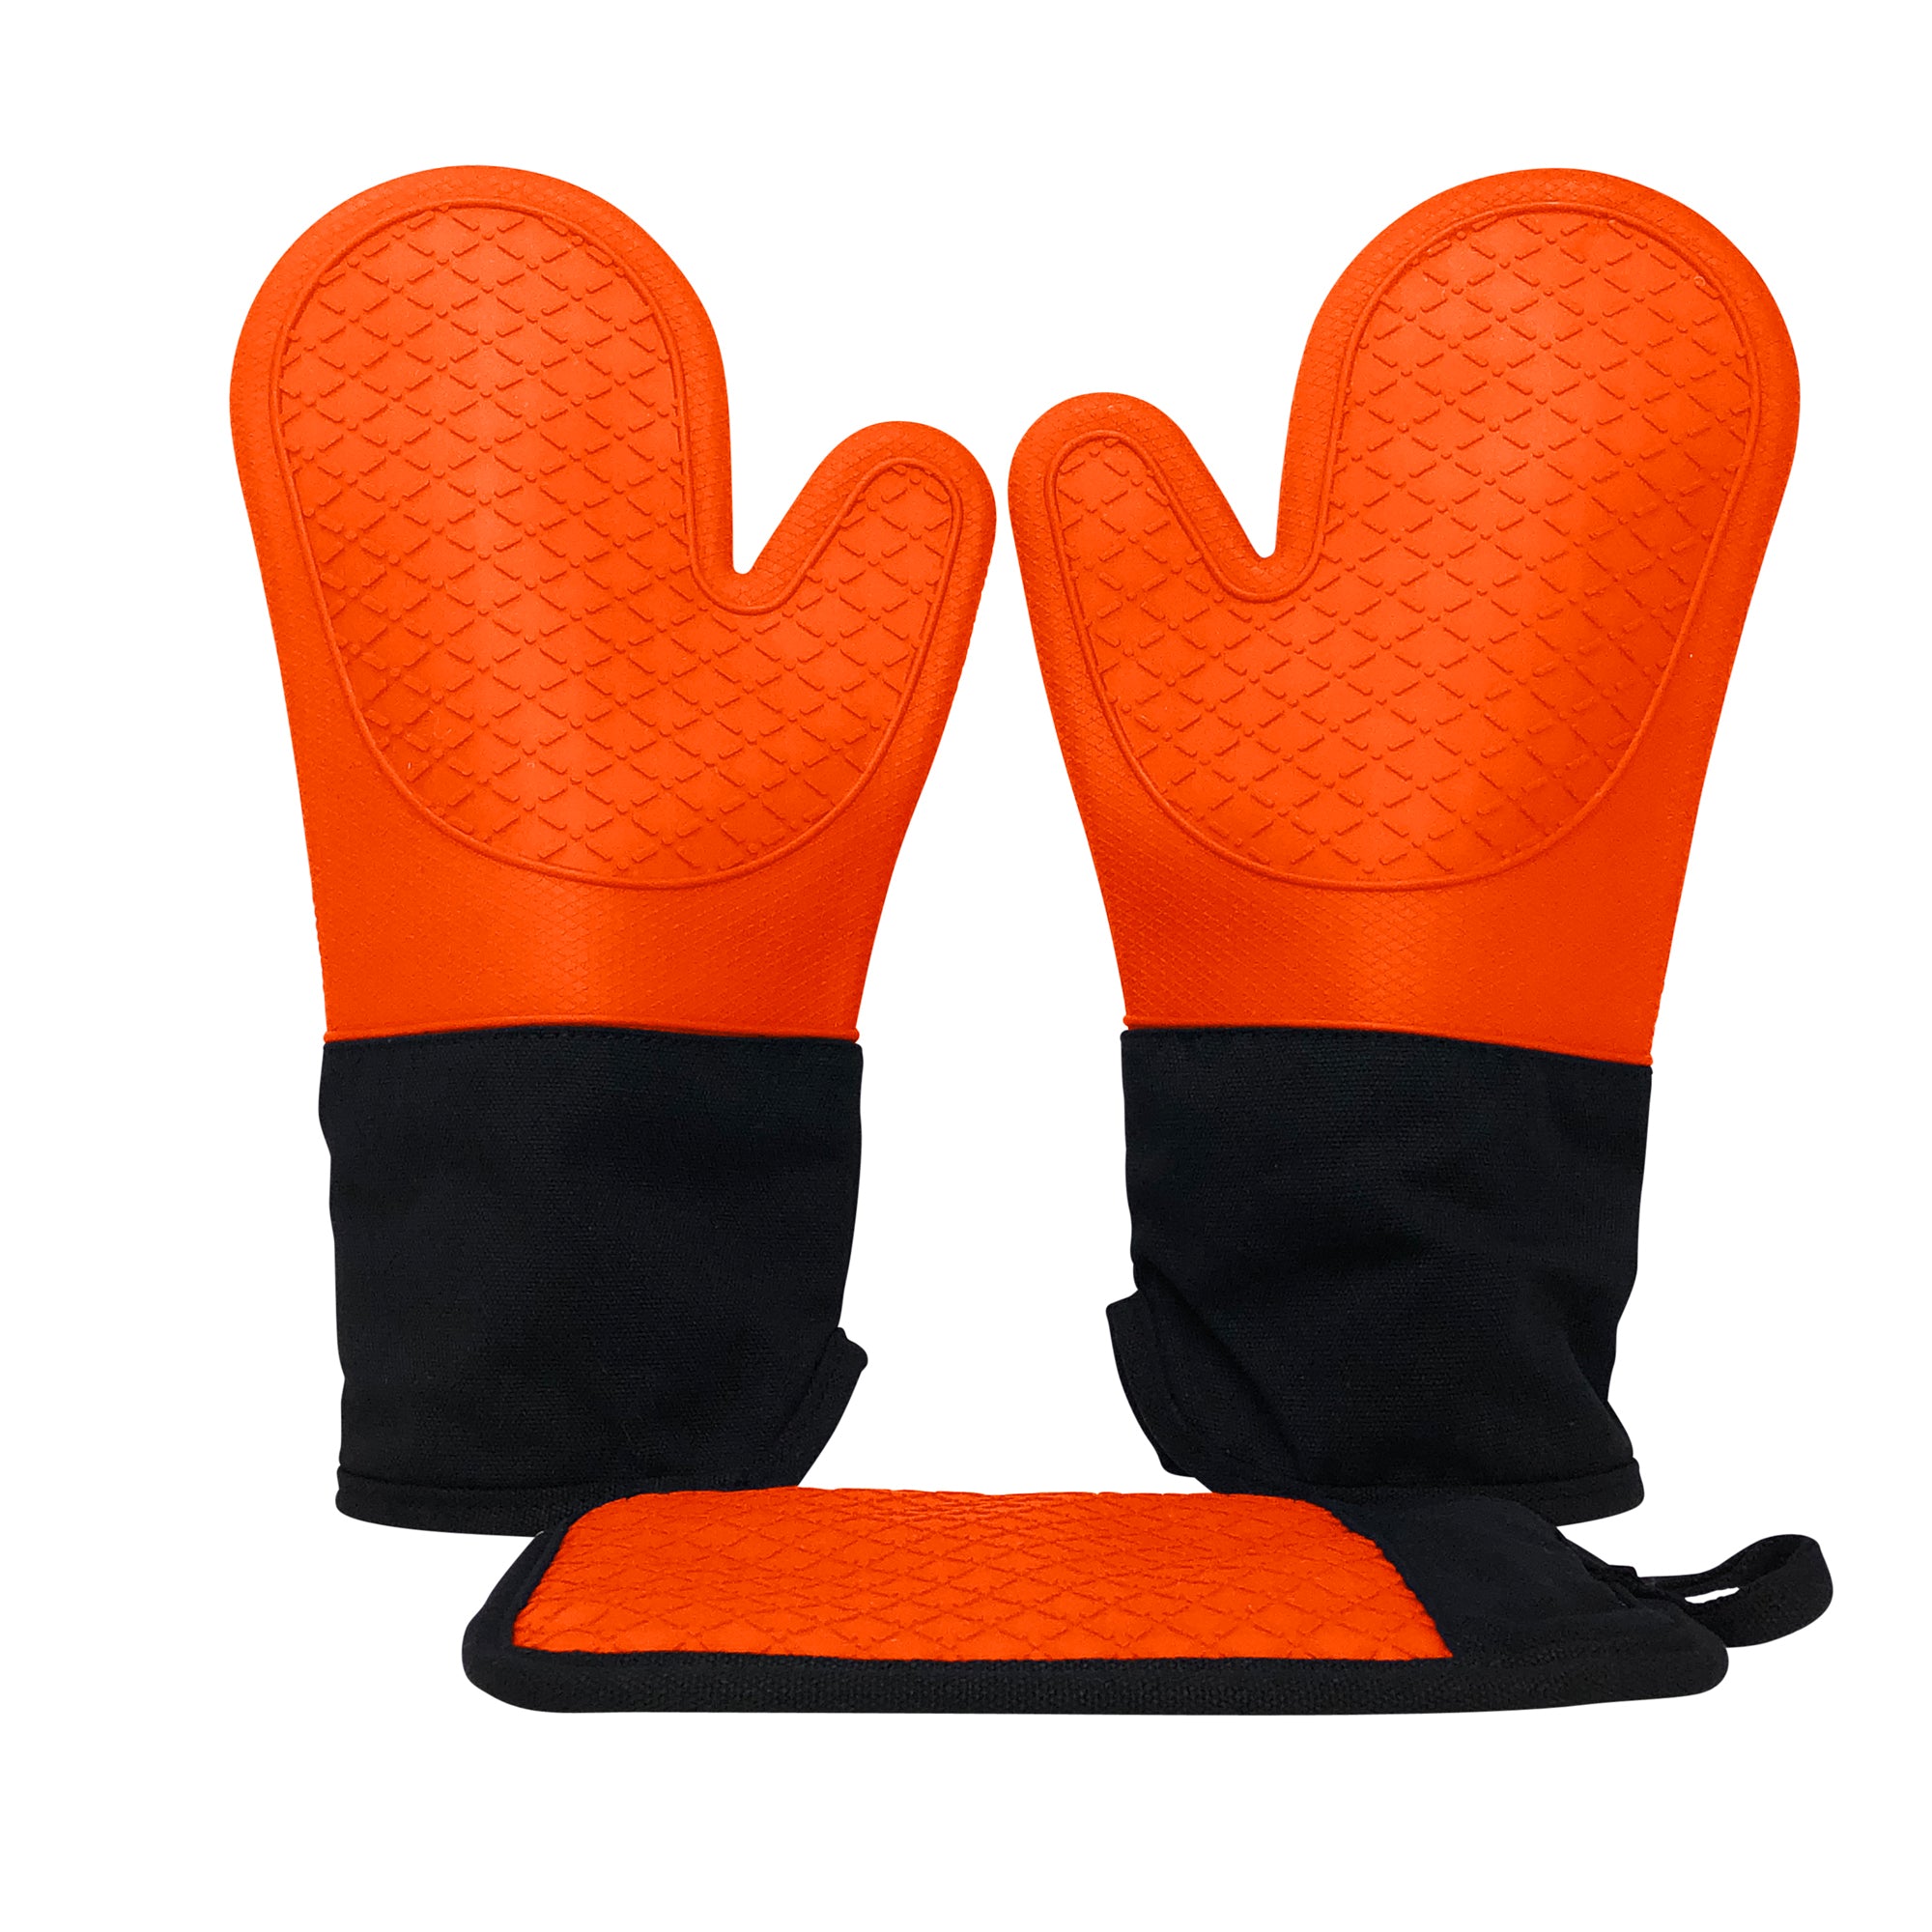 Ecoberi Silicone Oven Mitts and Pot Holder Set, Cook, Bake, BBQ, Orange, Pack of 3, Size: One Size